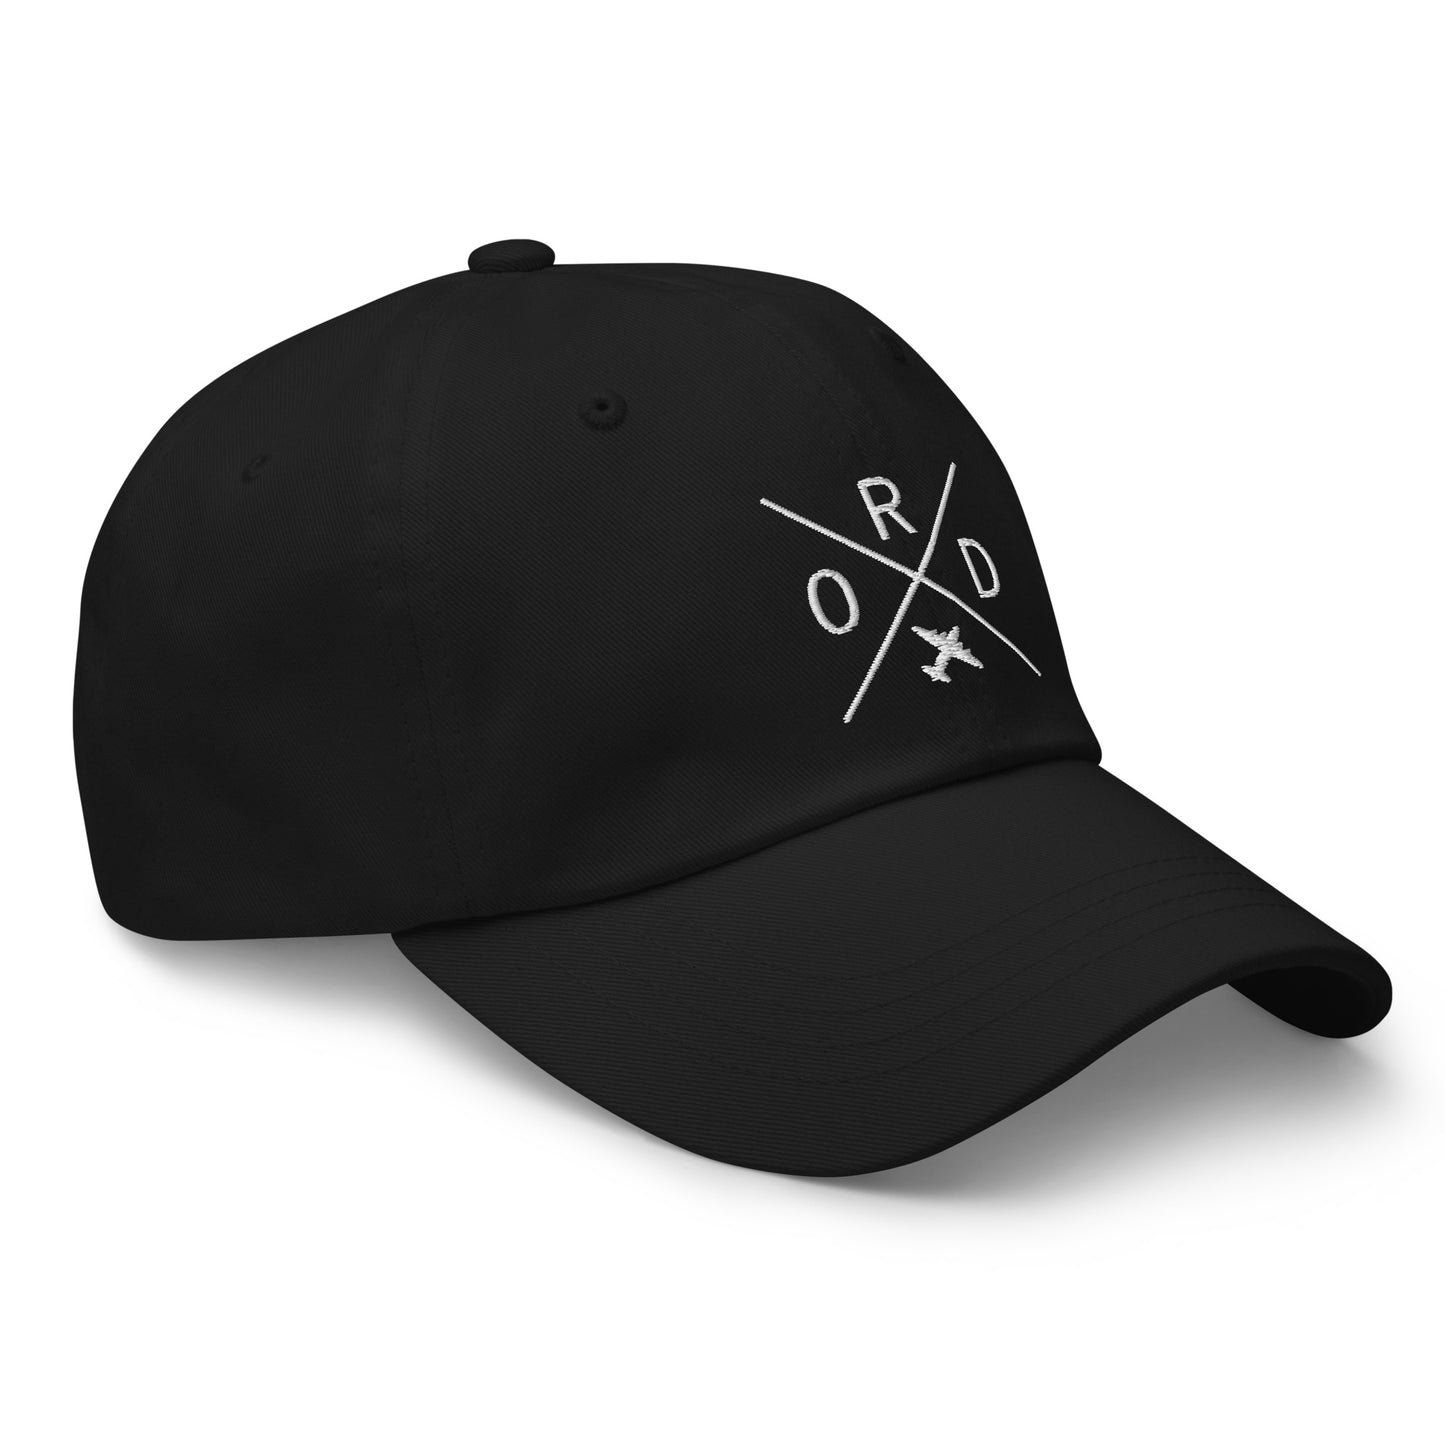 Crossed-X Dad Hat - White • ORD Chicago • YHM Designs - Image 15